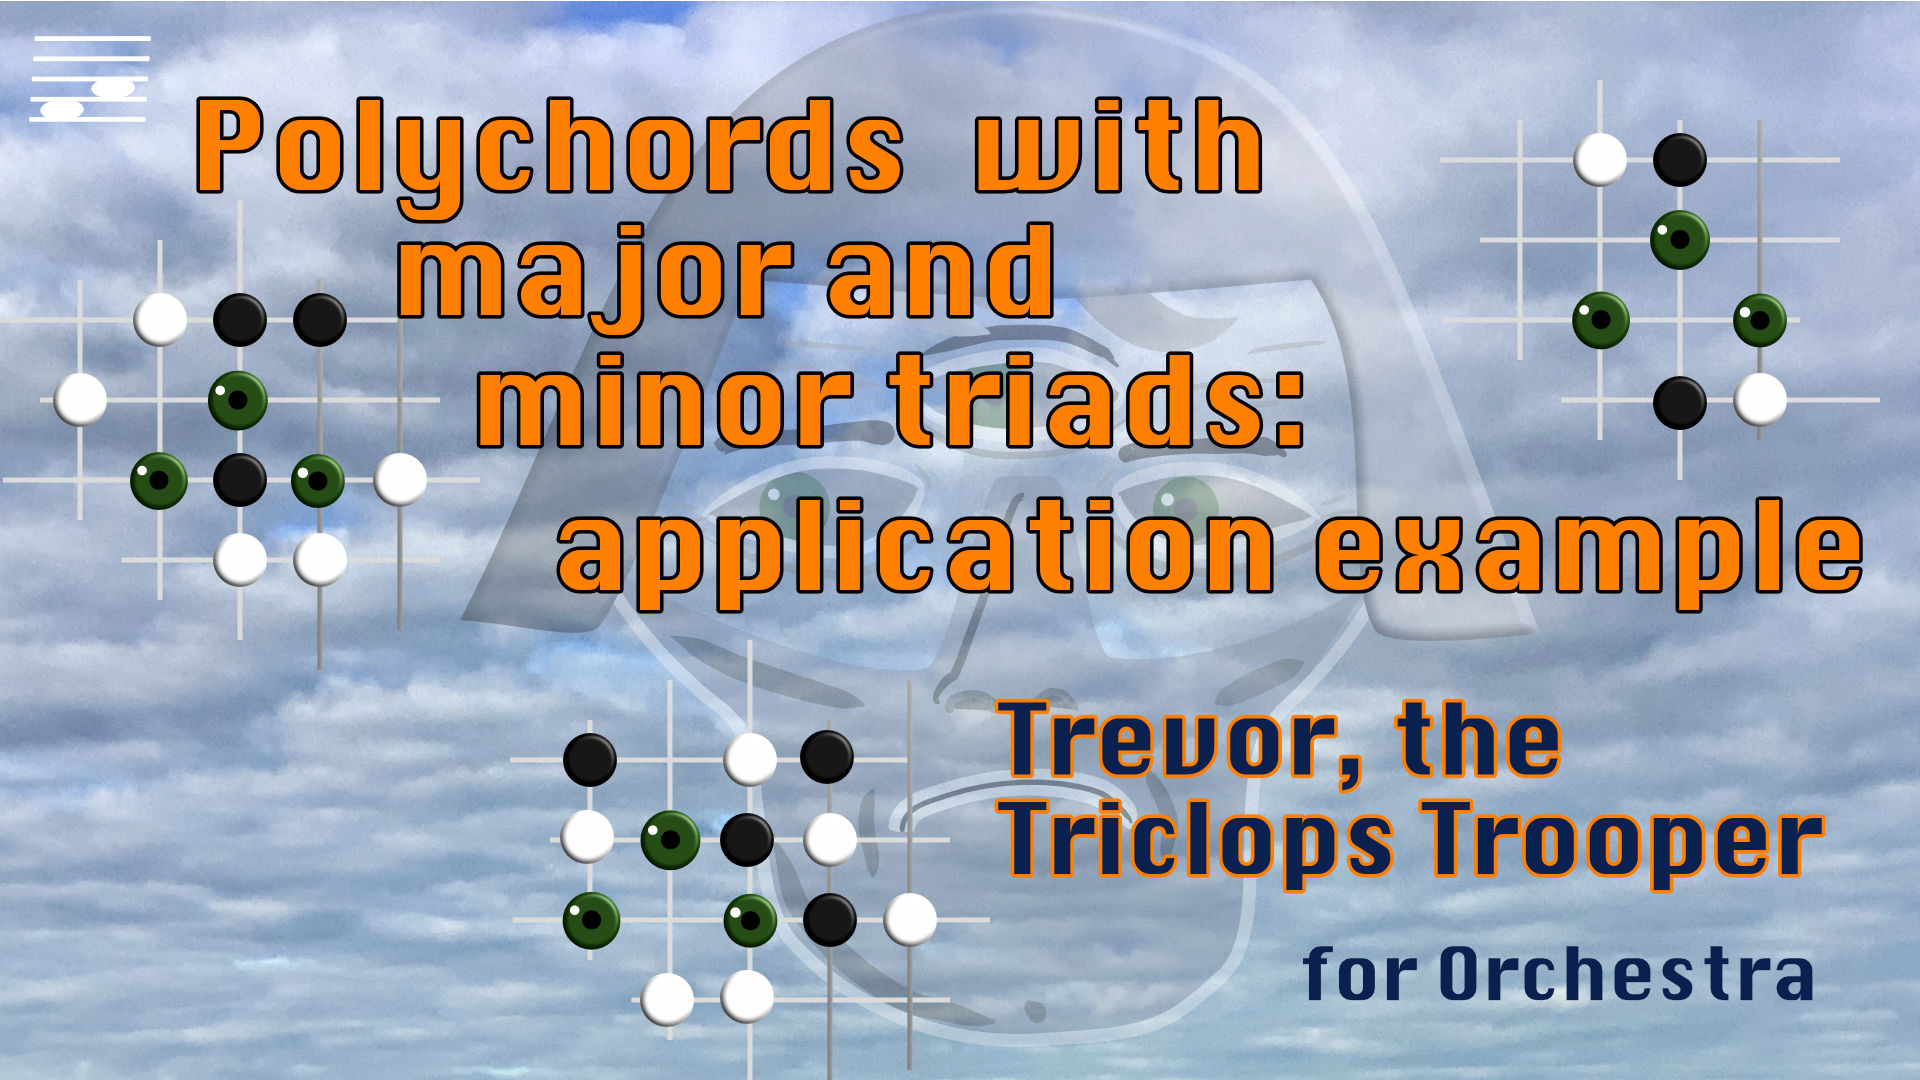 YouTube video of the Polychords with Major and Minor Triads: Application Example tutorial